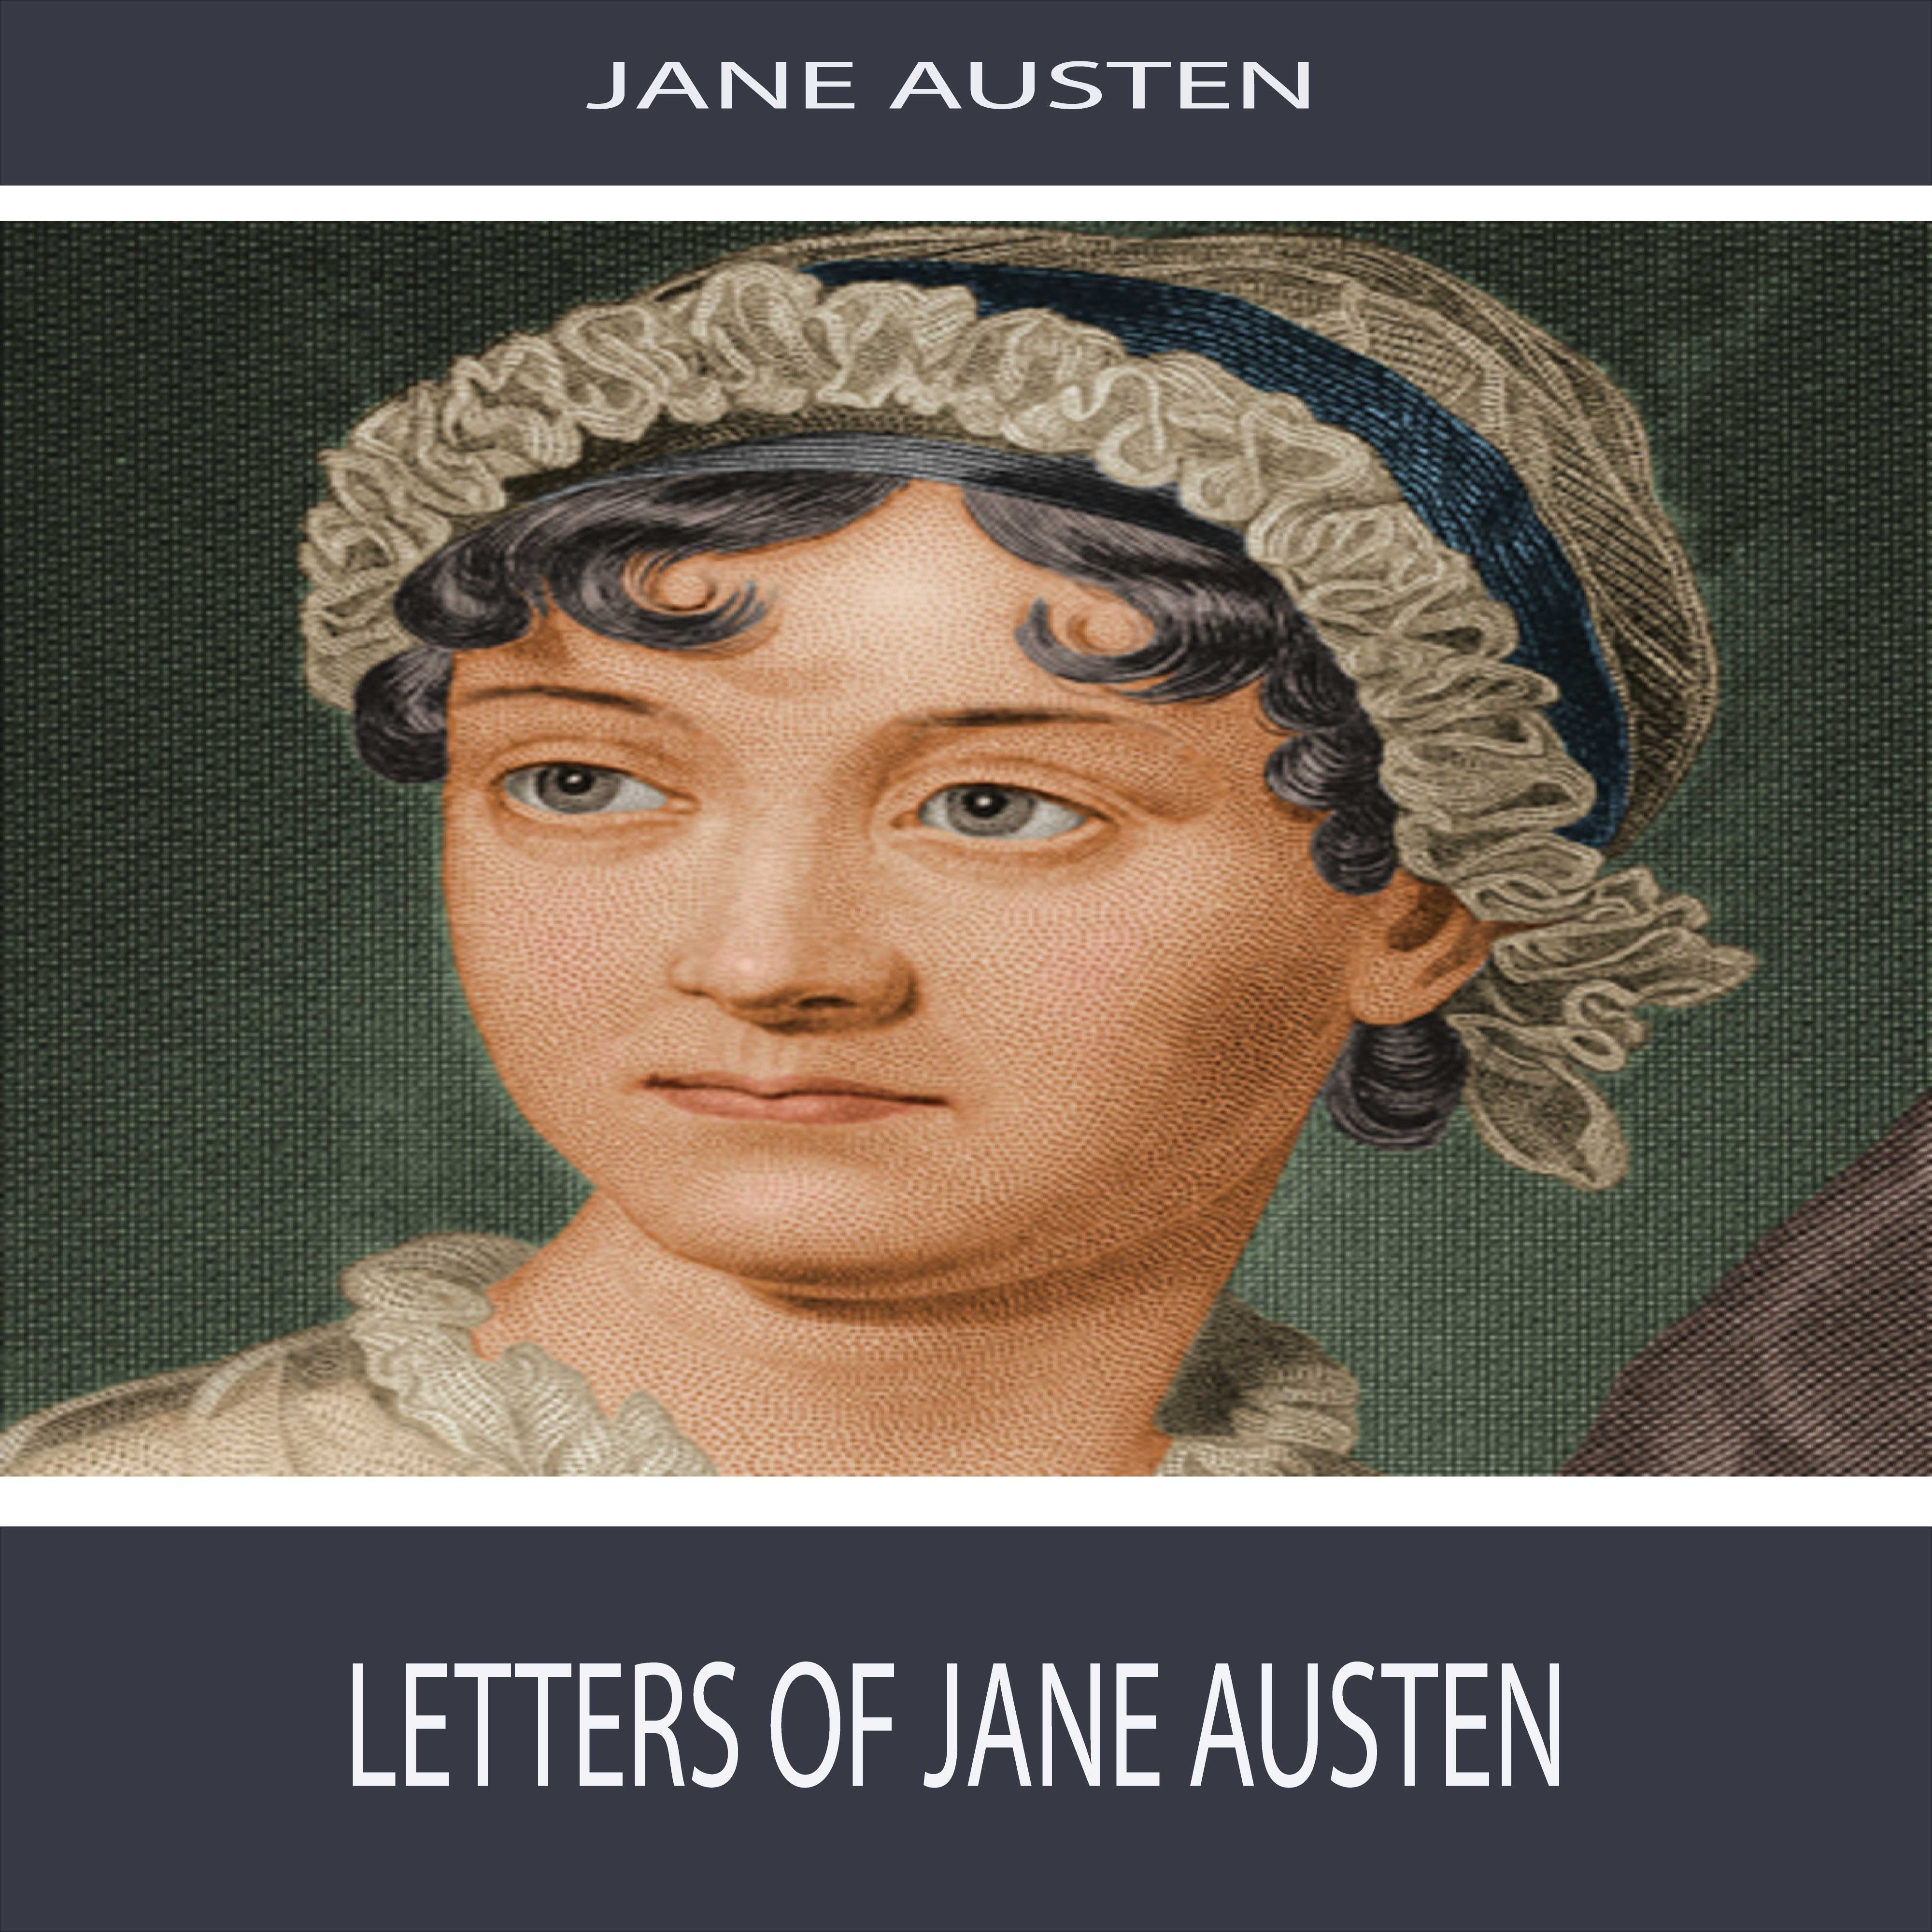 Letters of Jane Austen: Section 16